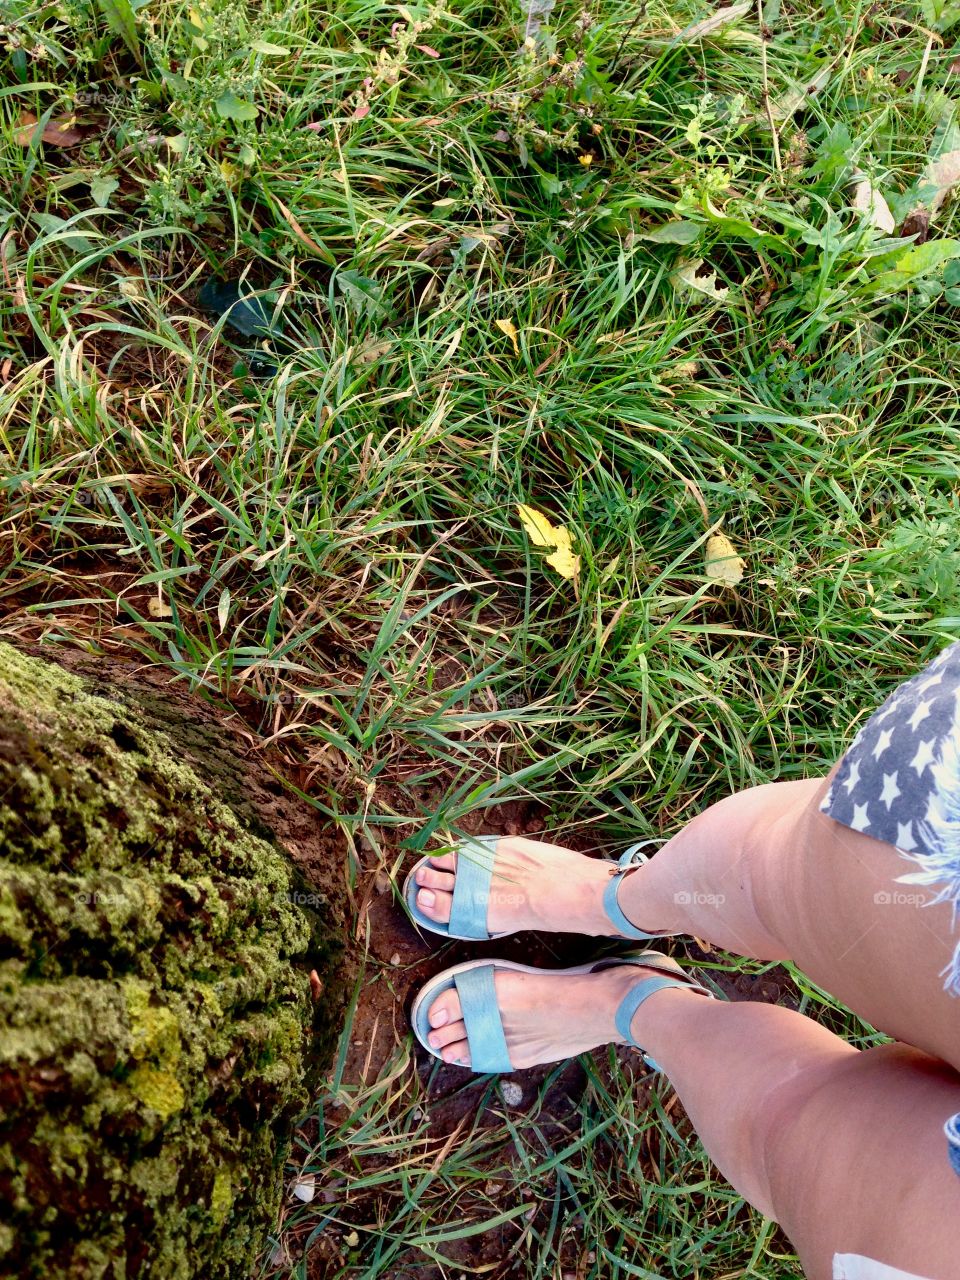 Feet in green sandals standing next to tree and grass around